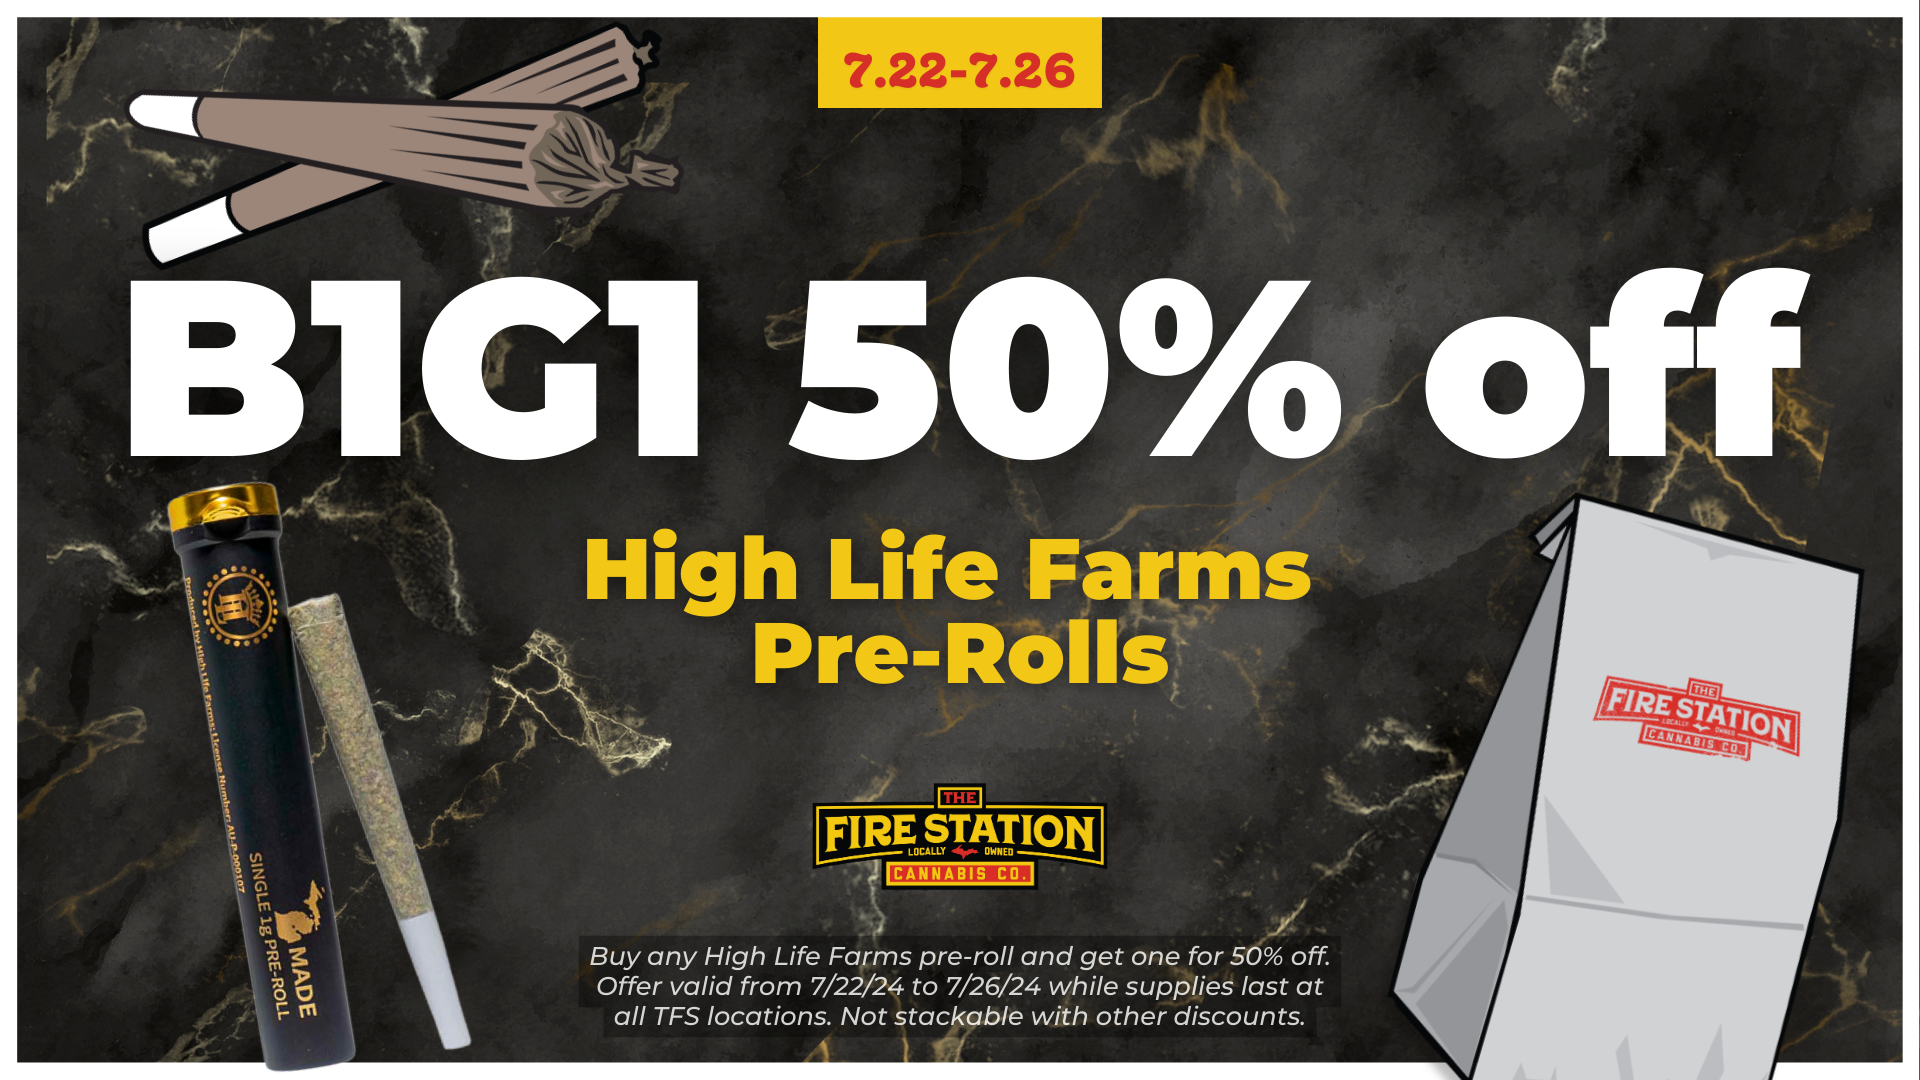 Buy any High Life Farms pre-roll and get one for 50% off. Offer valid from 7/22/24 to 7/26/24 while supplies last at all TFS locations. Not stackable with other discounts.